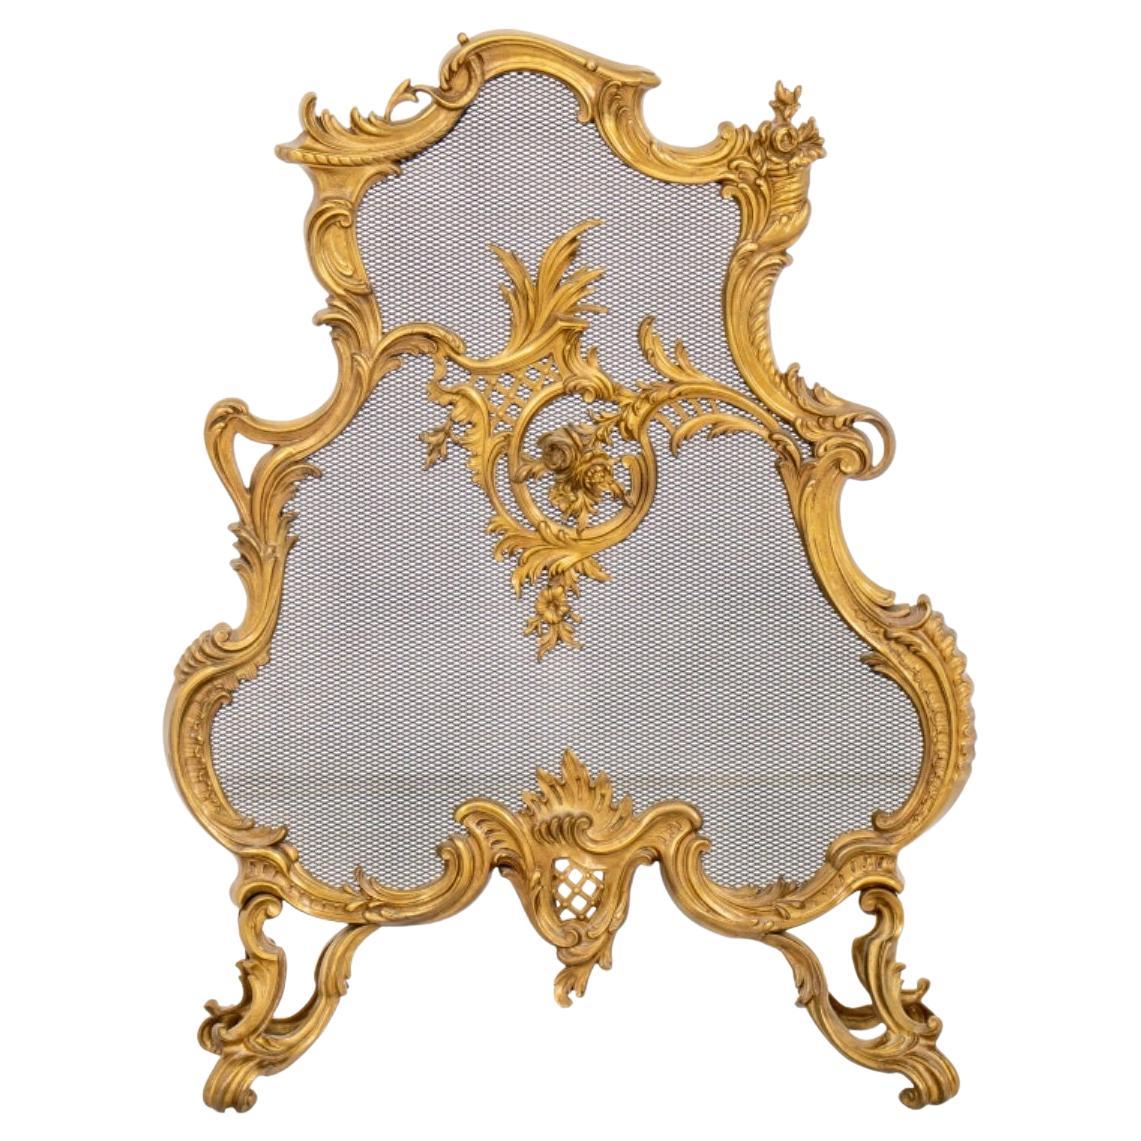 Rococo Revival Style Gilt Brass Fire Screen For Sale